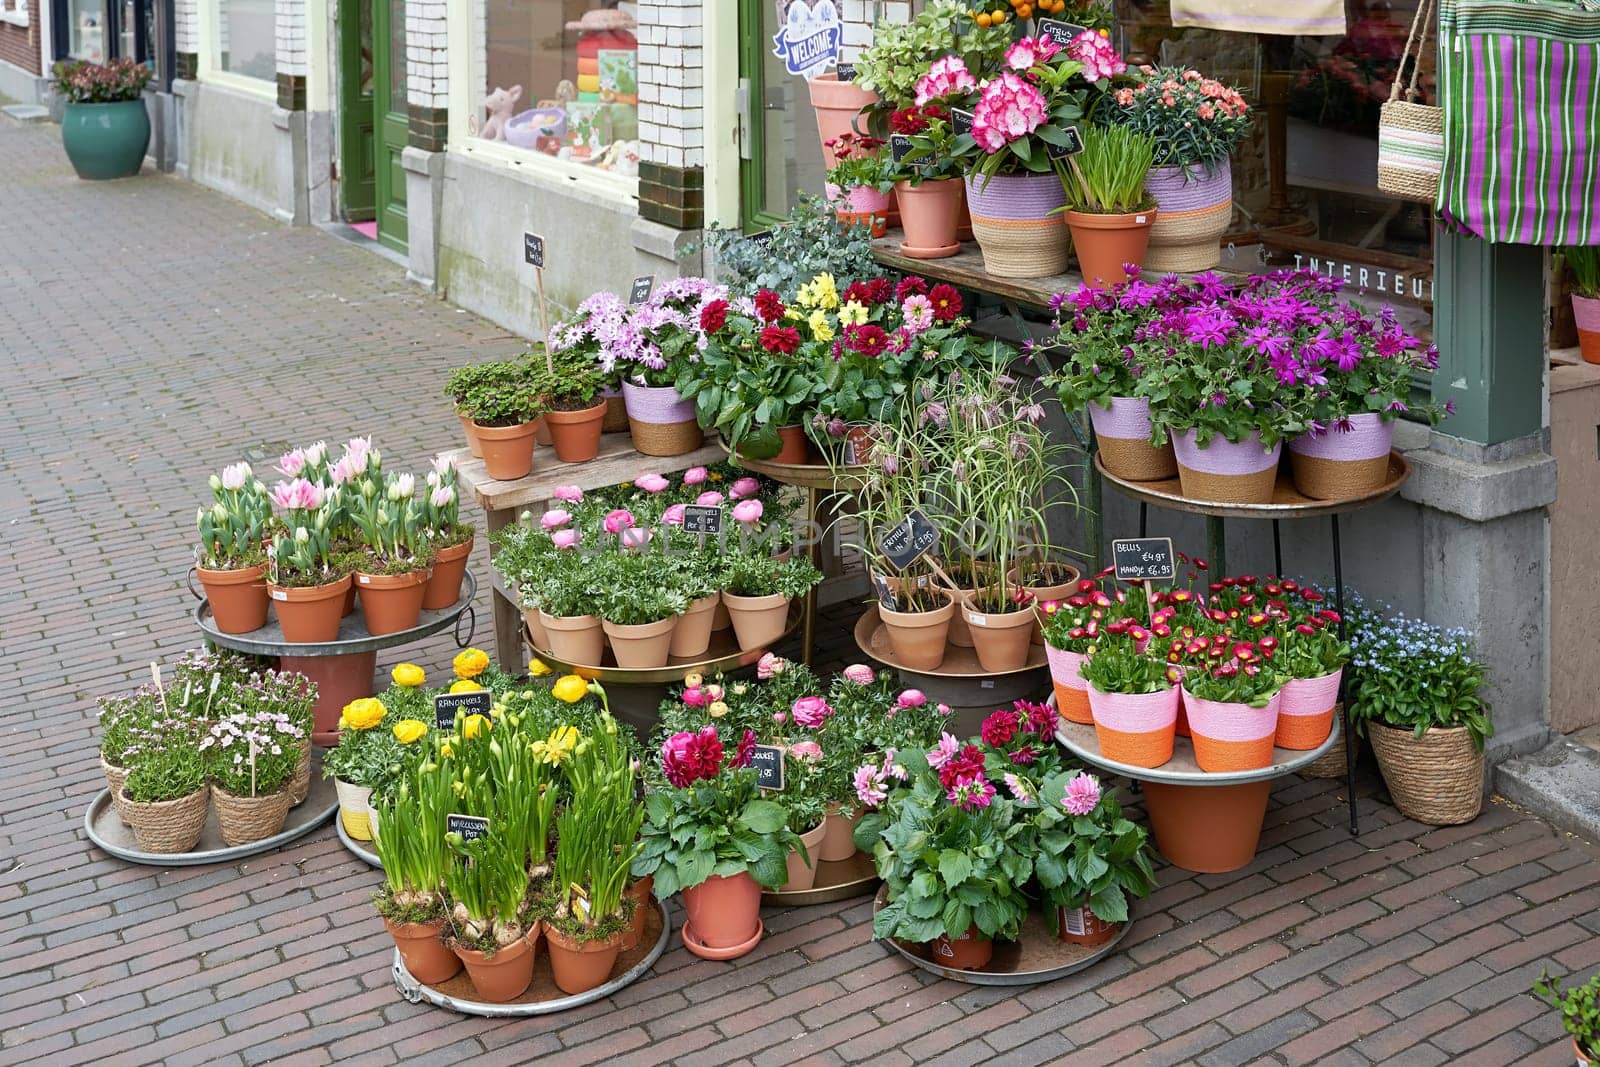 Flower shop with many plants traditional for the Netherlands in spring. by berezko